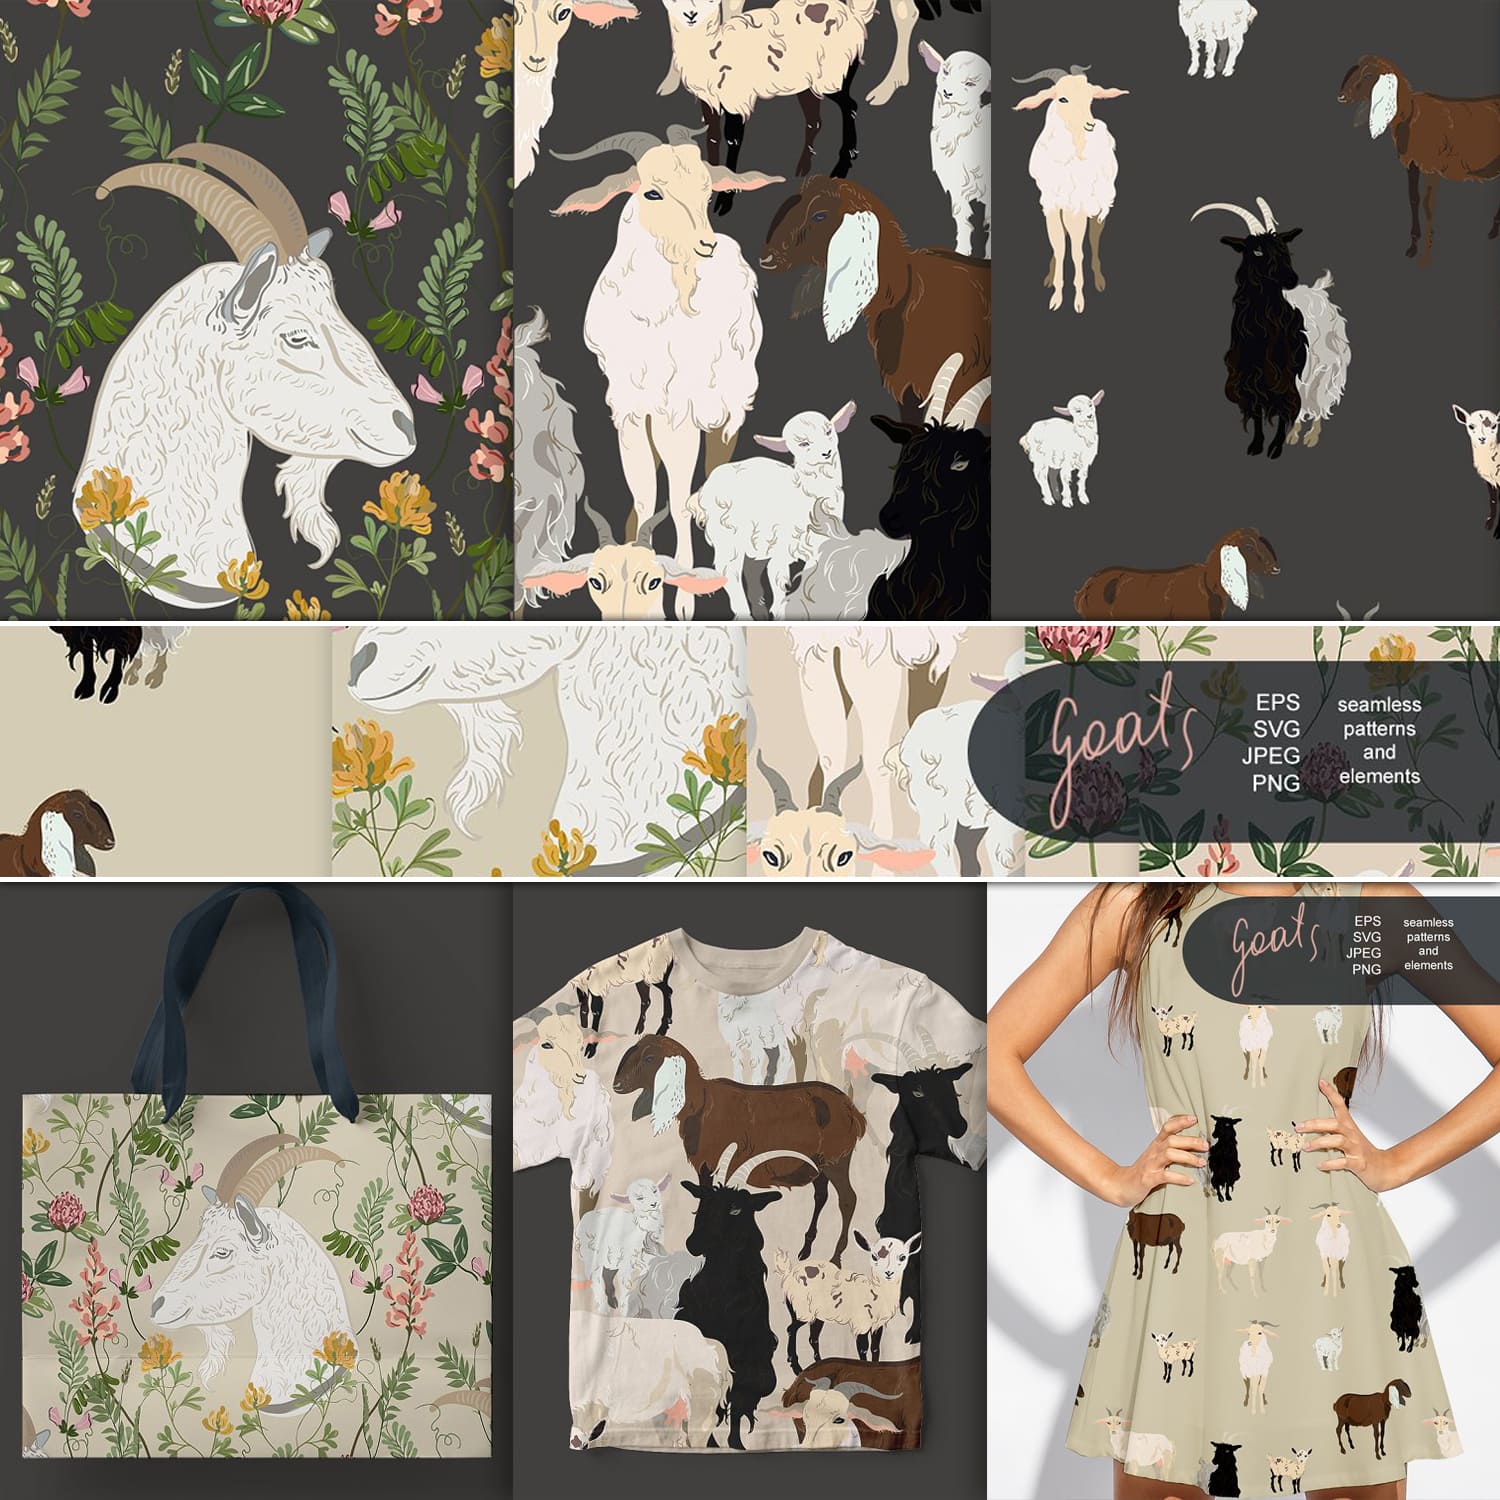 Goat seamless + clipart vector set cover.